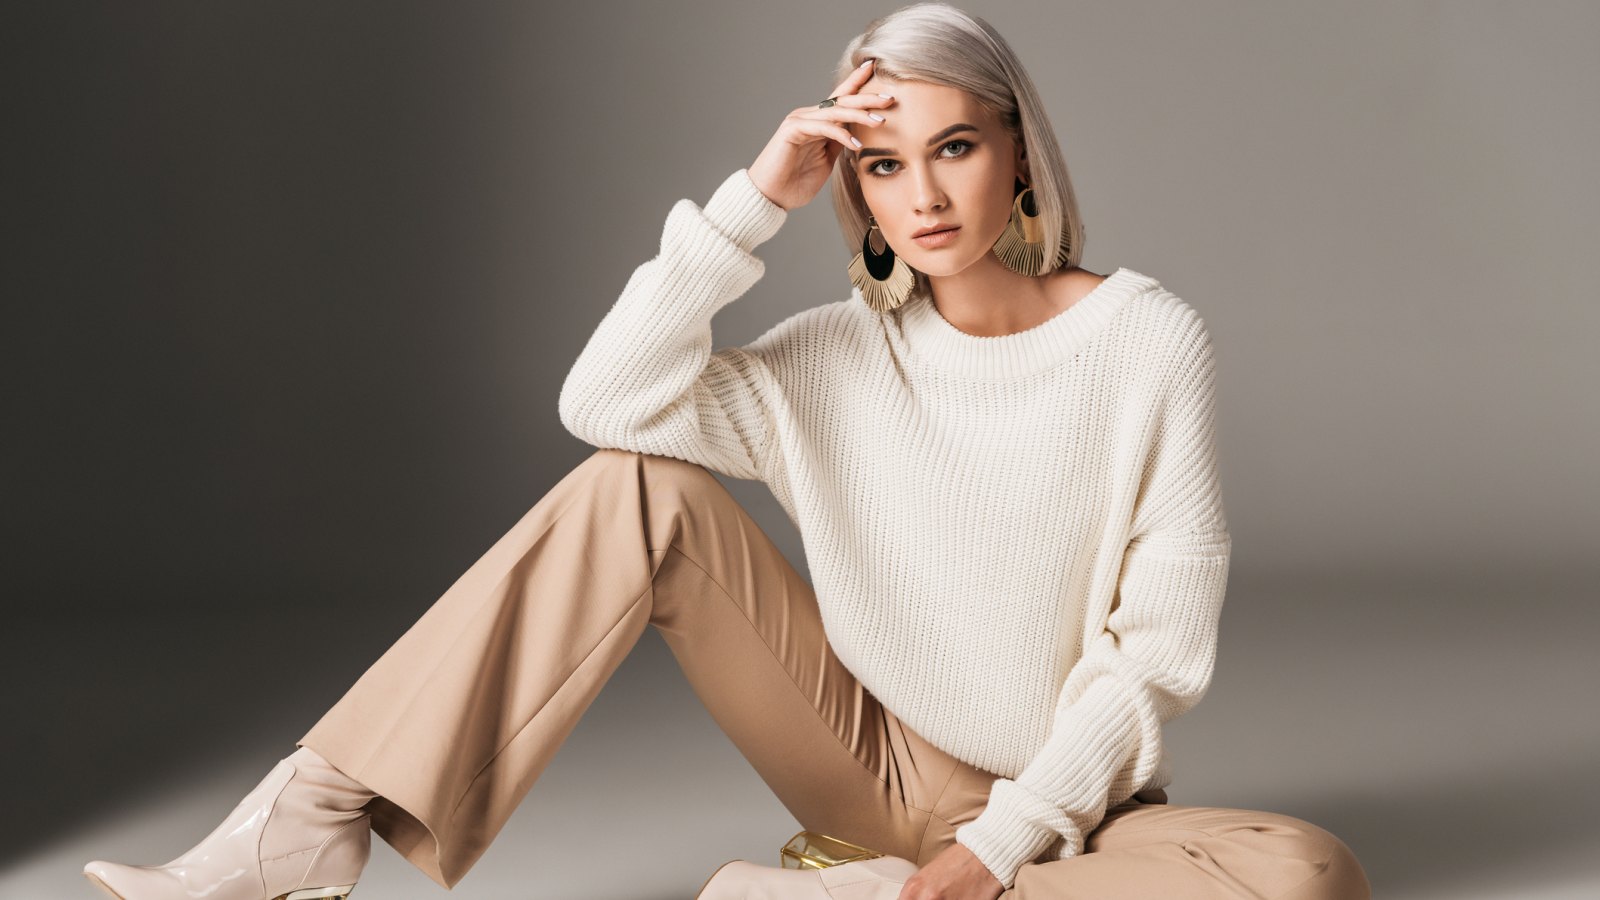 attractive fashionable woman posing in white trendy sweater, beige pants and autumn heels, on grey